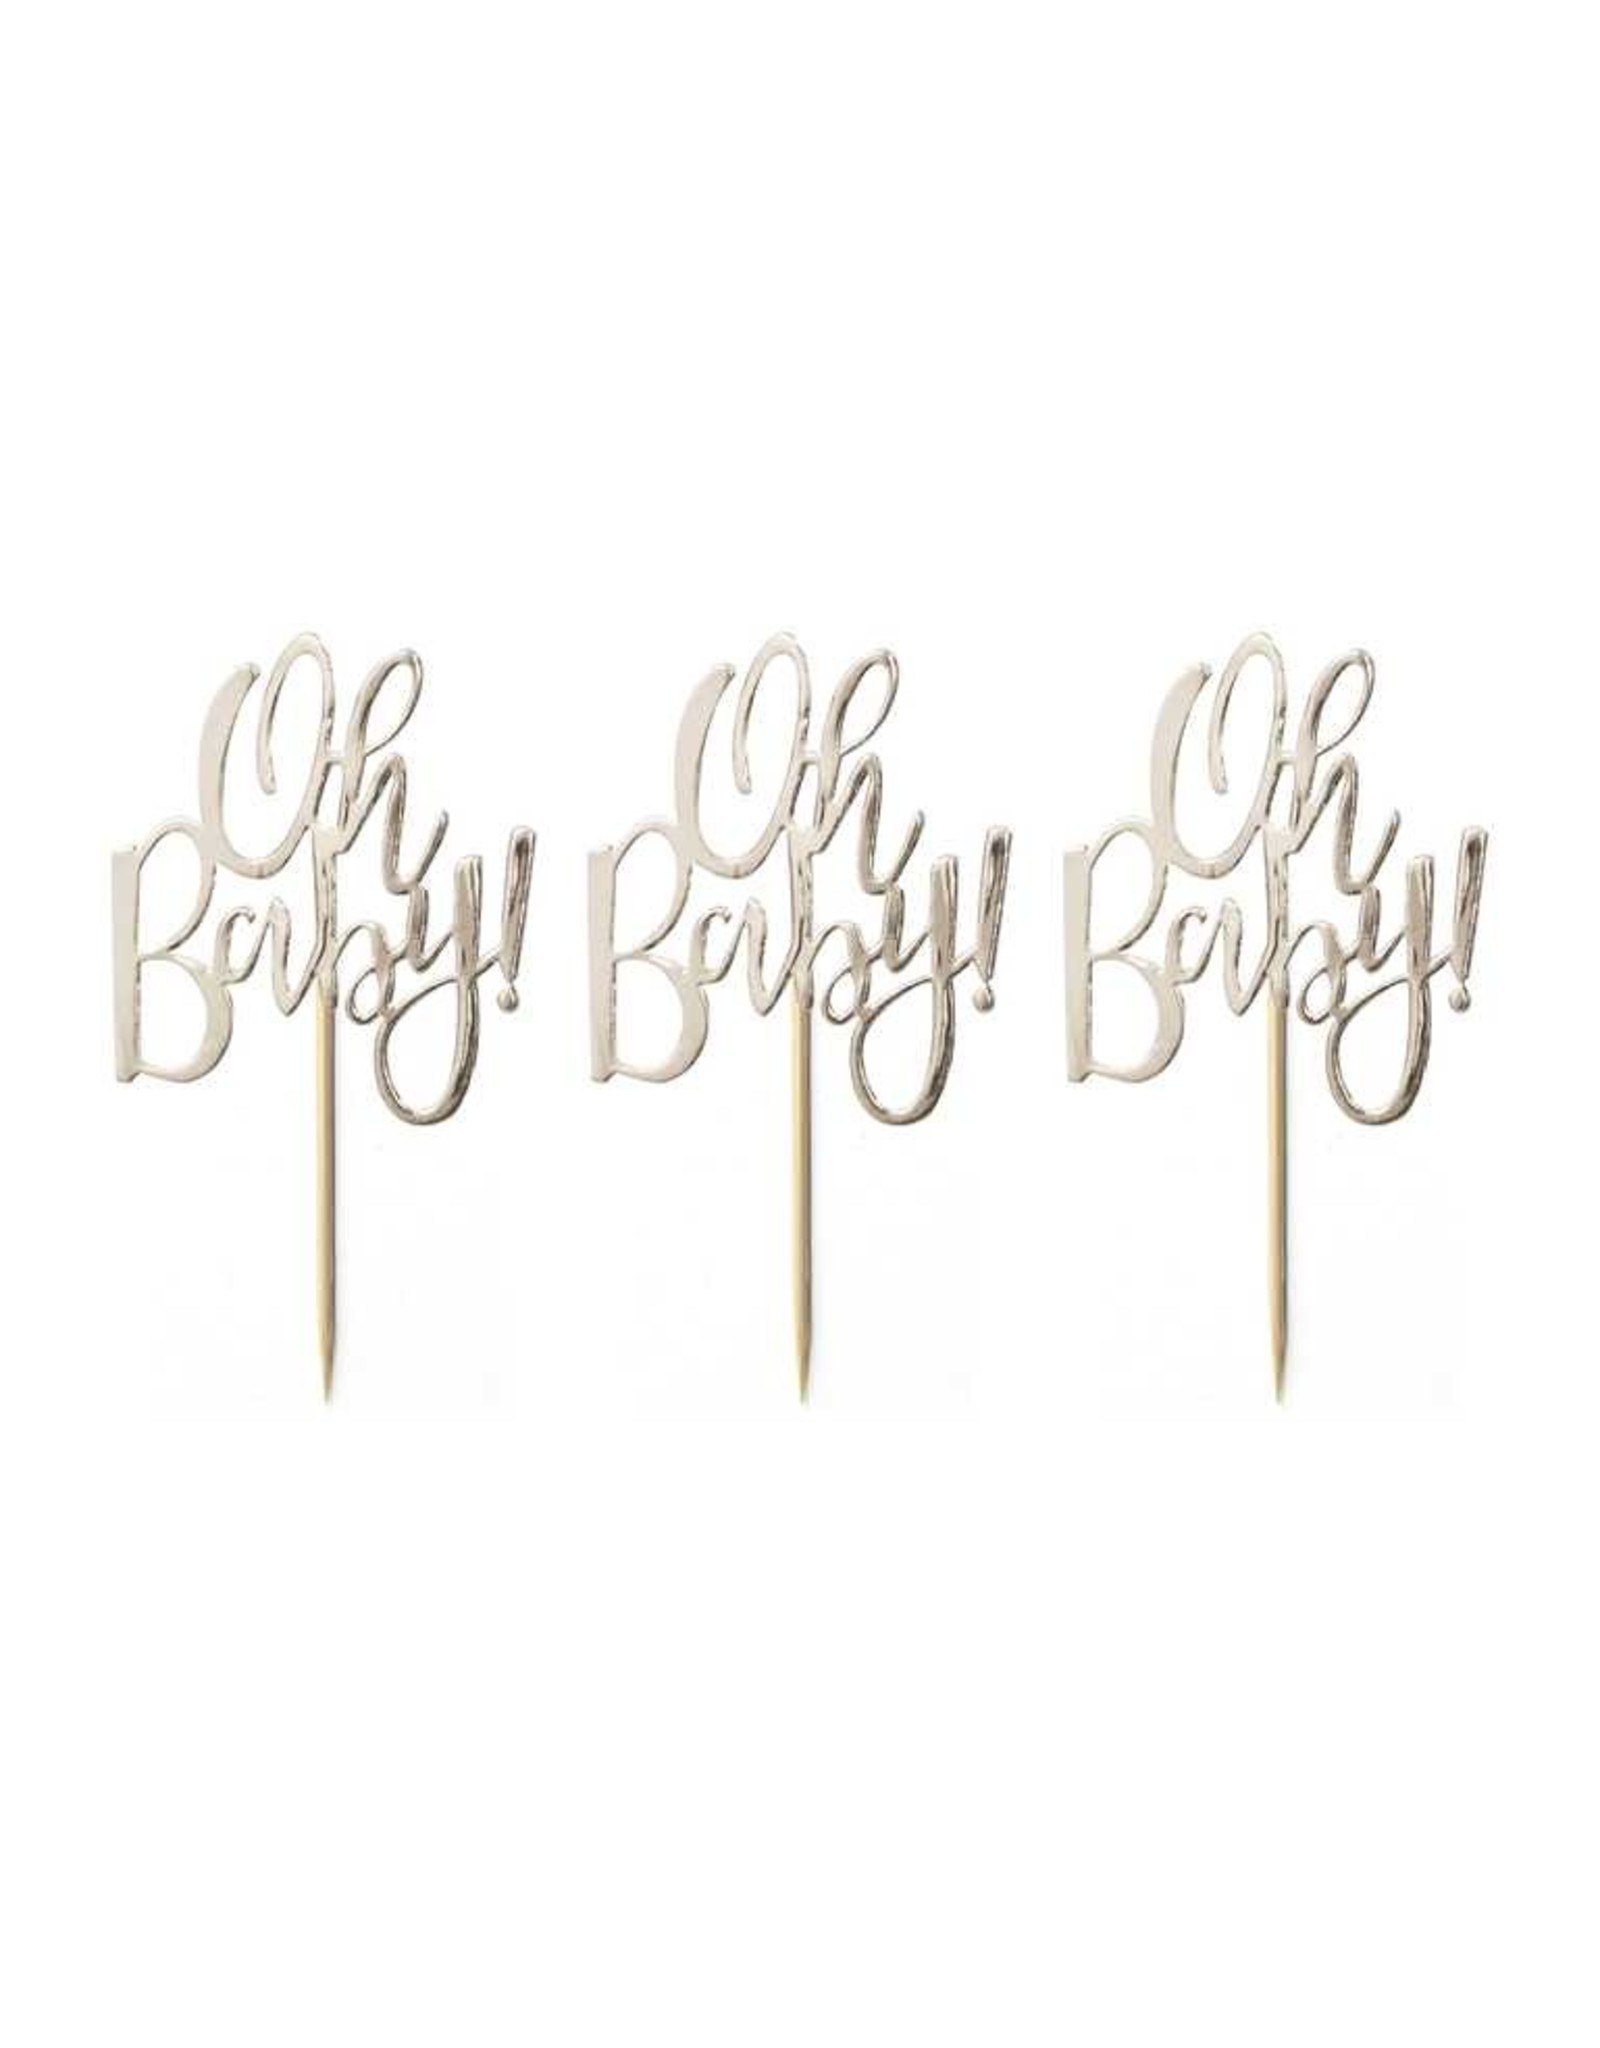 Oh baby cupcake topper